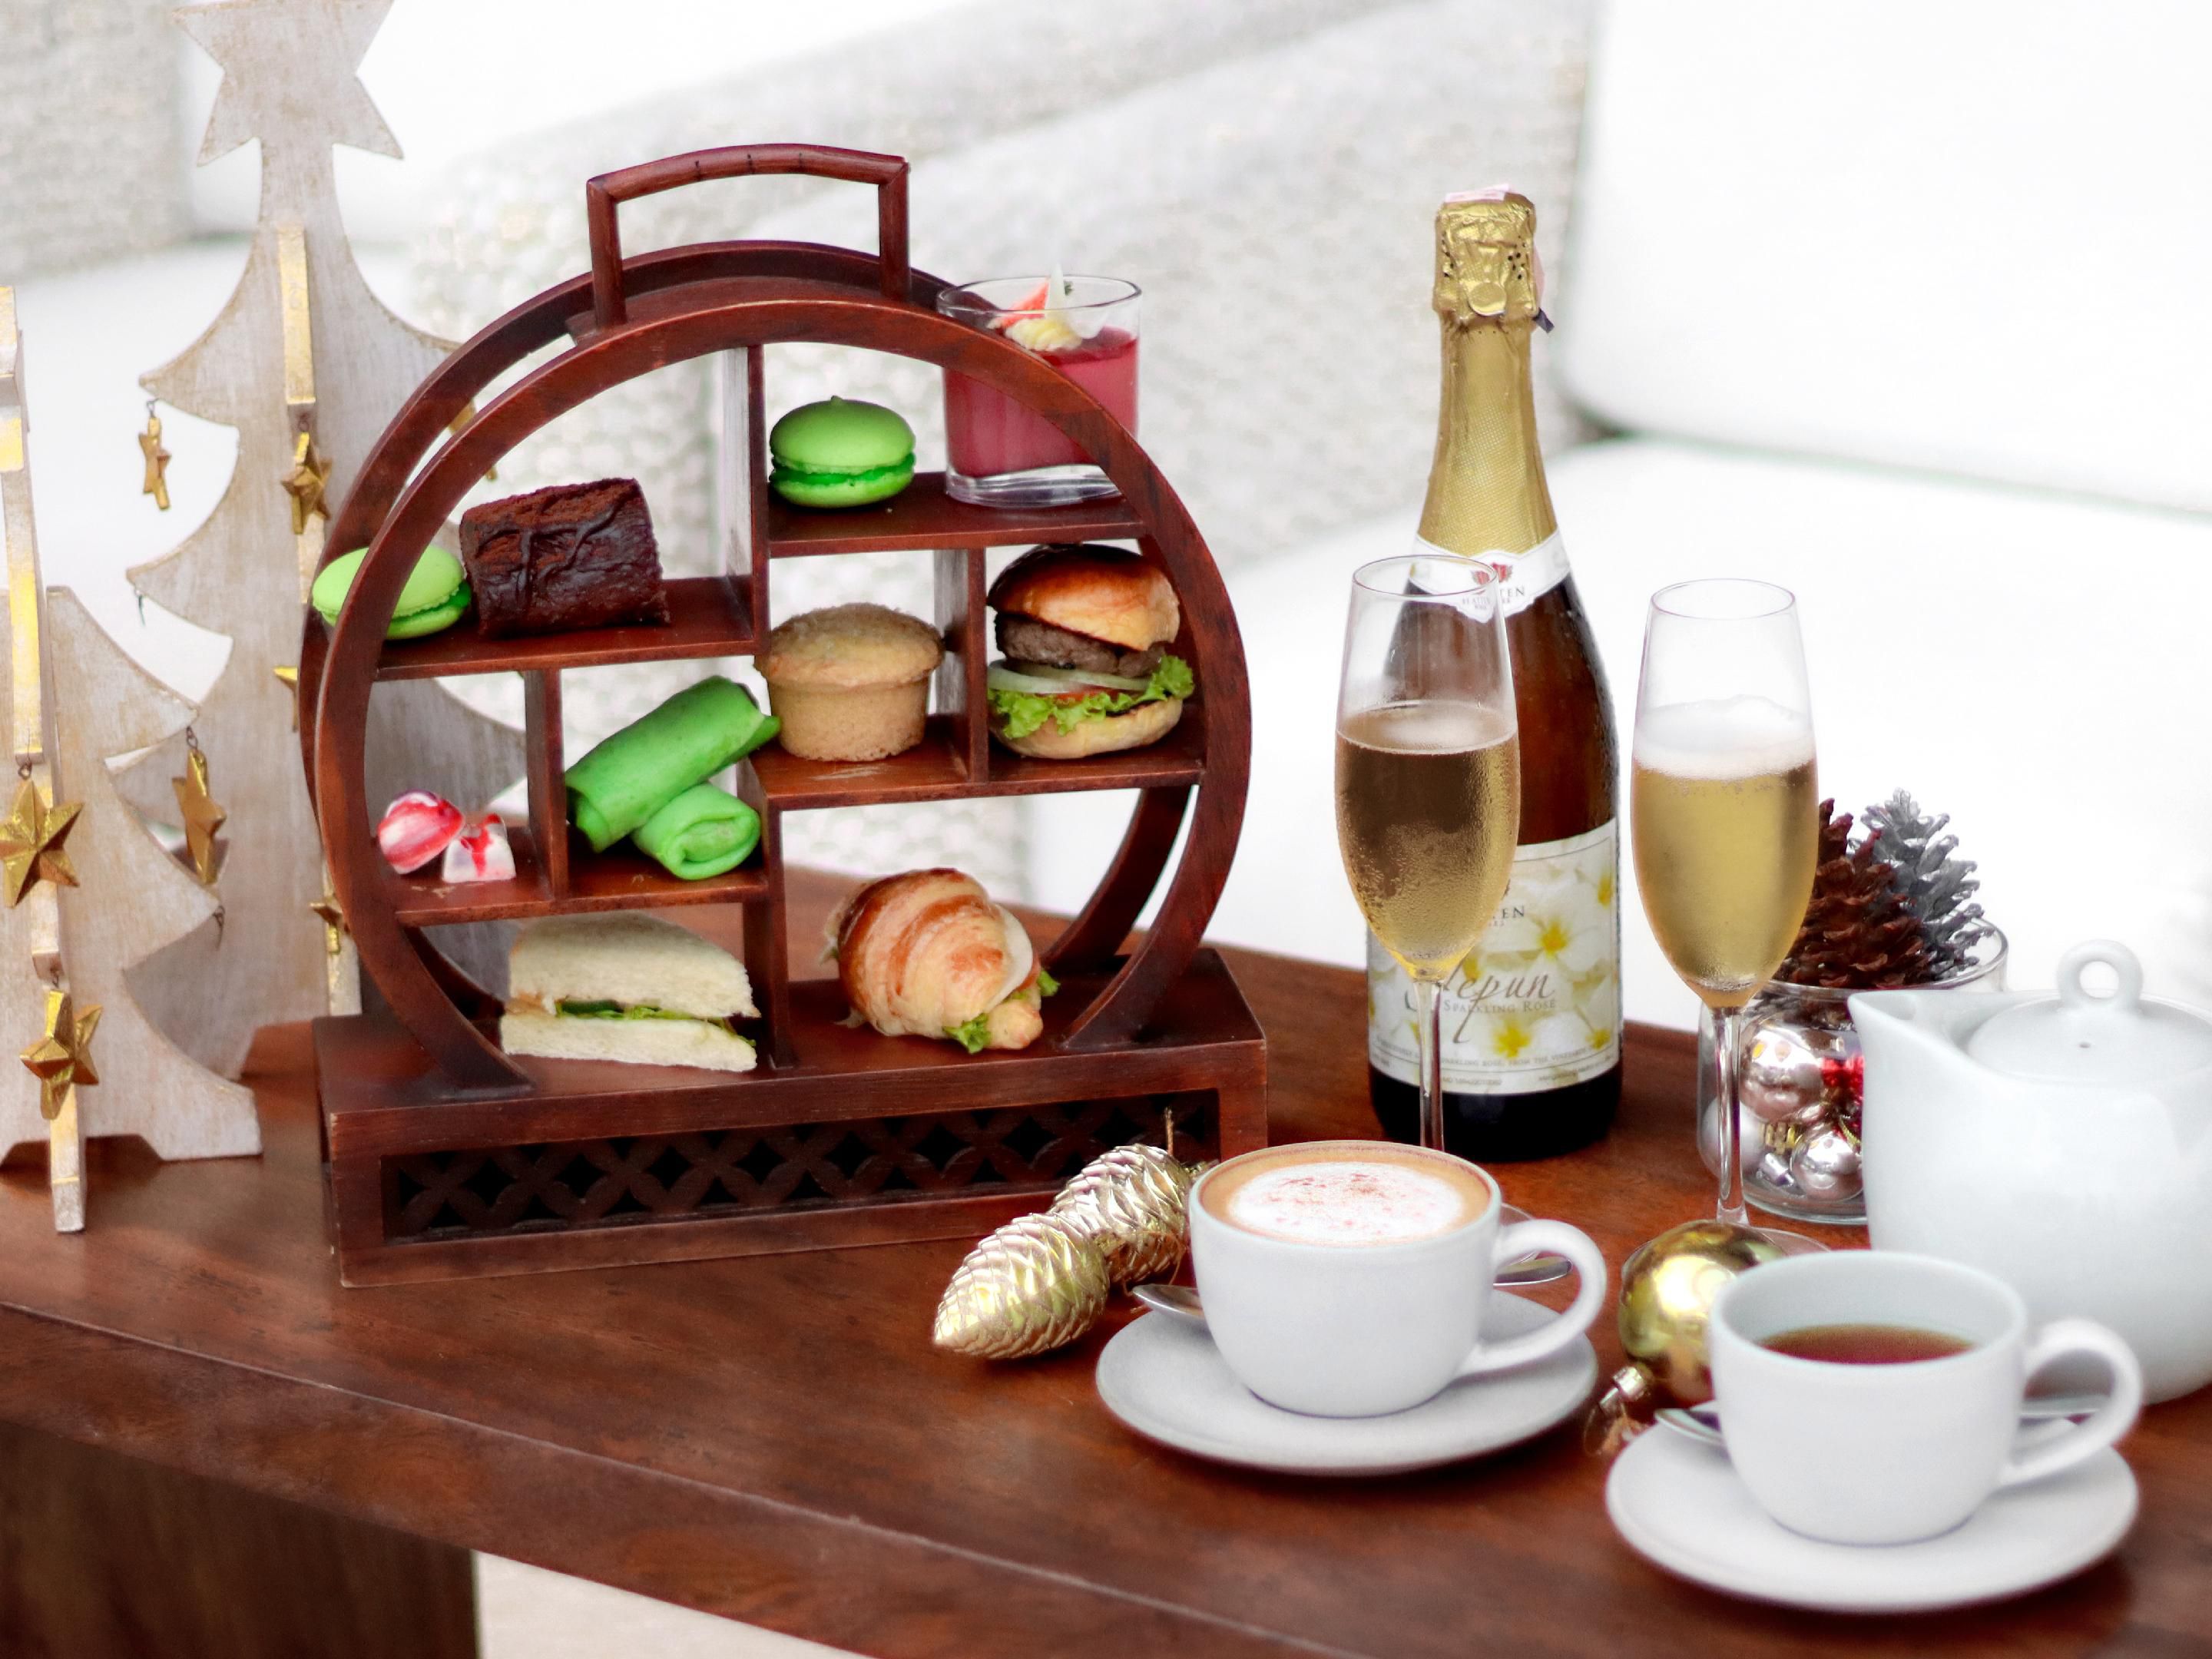 Daily Sparkling Afternoon Tea